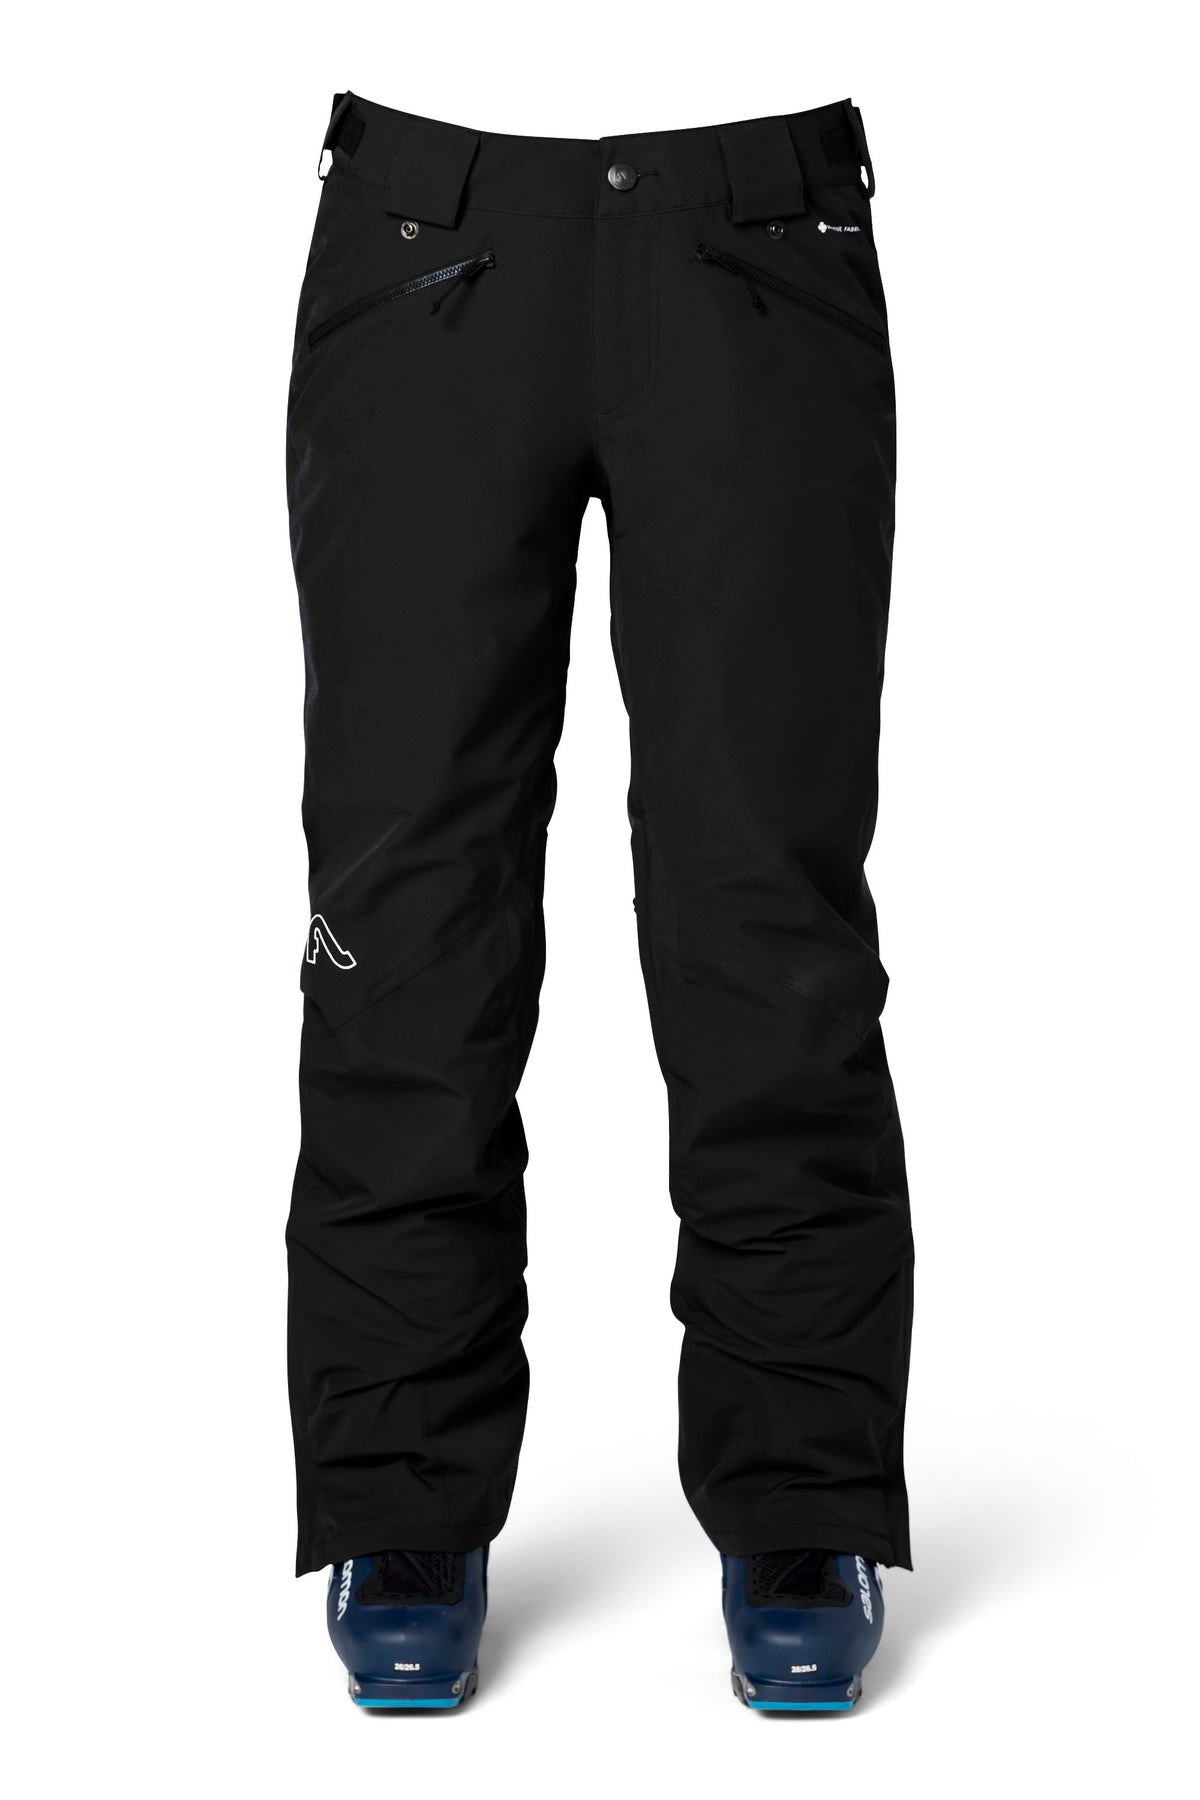 W's Daisy Insulated Pant